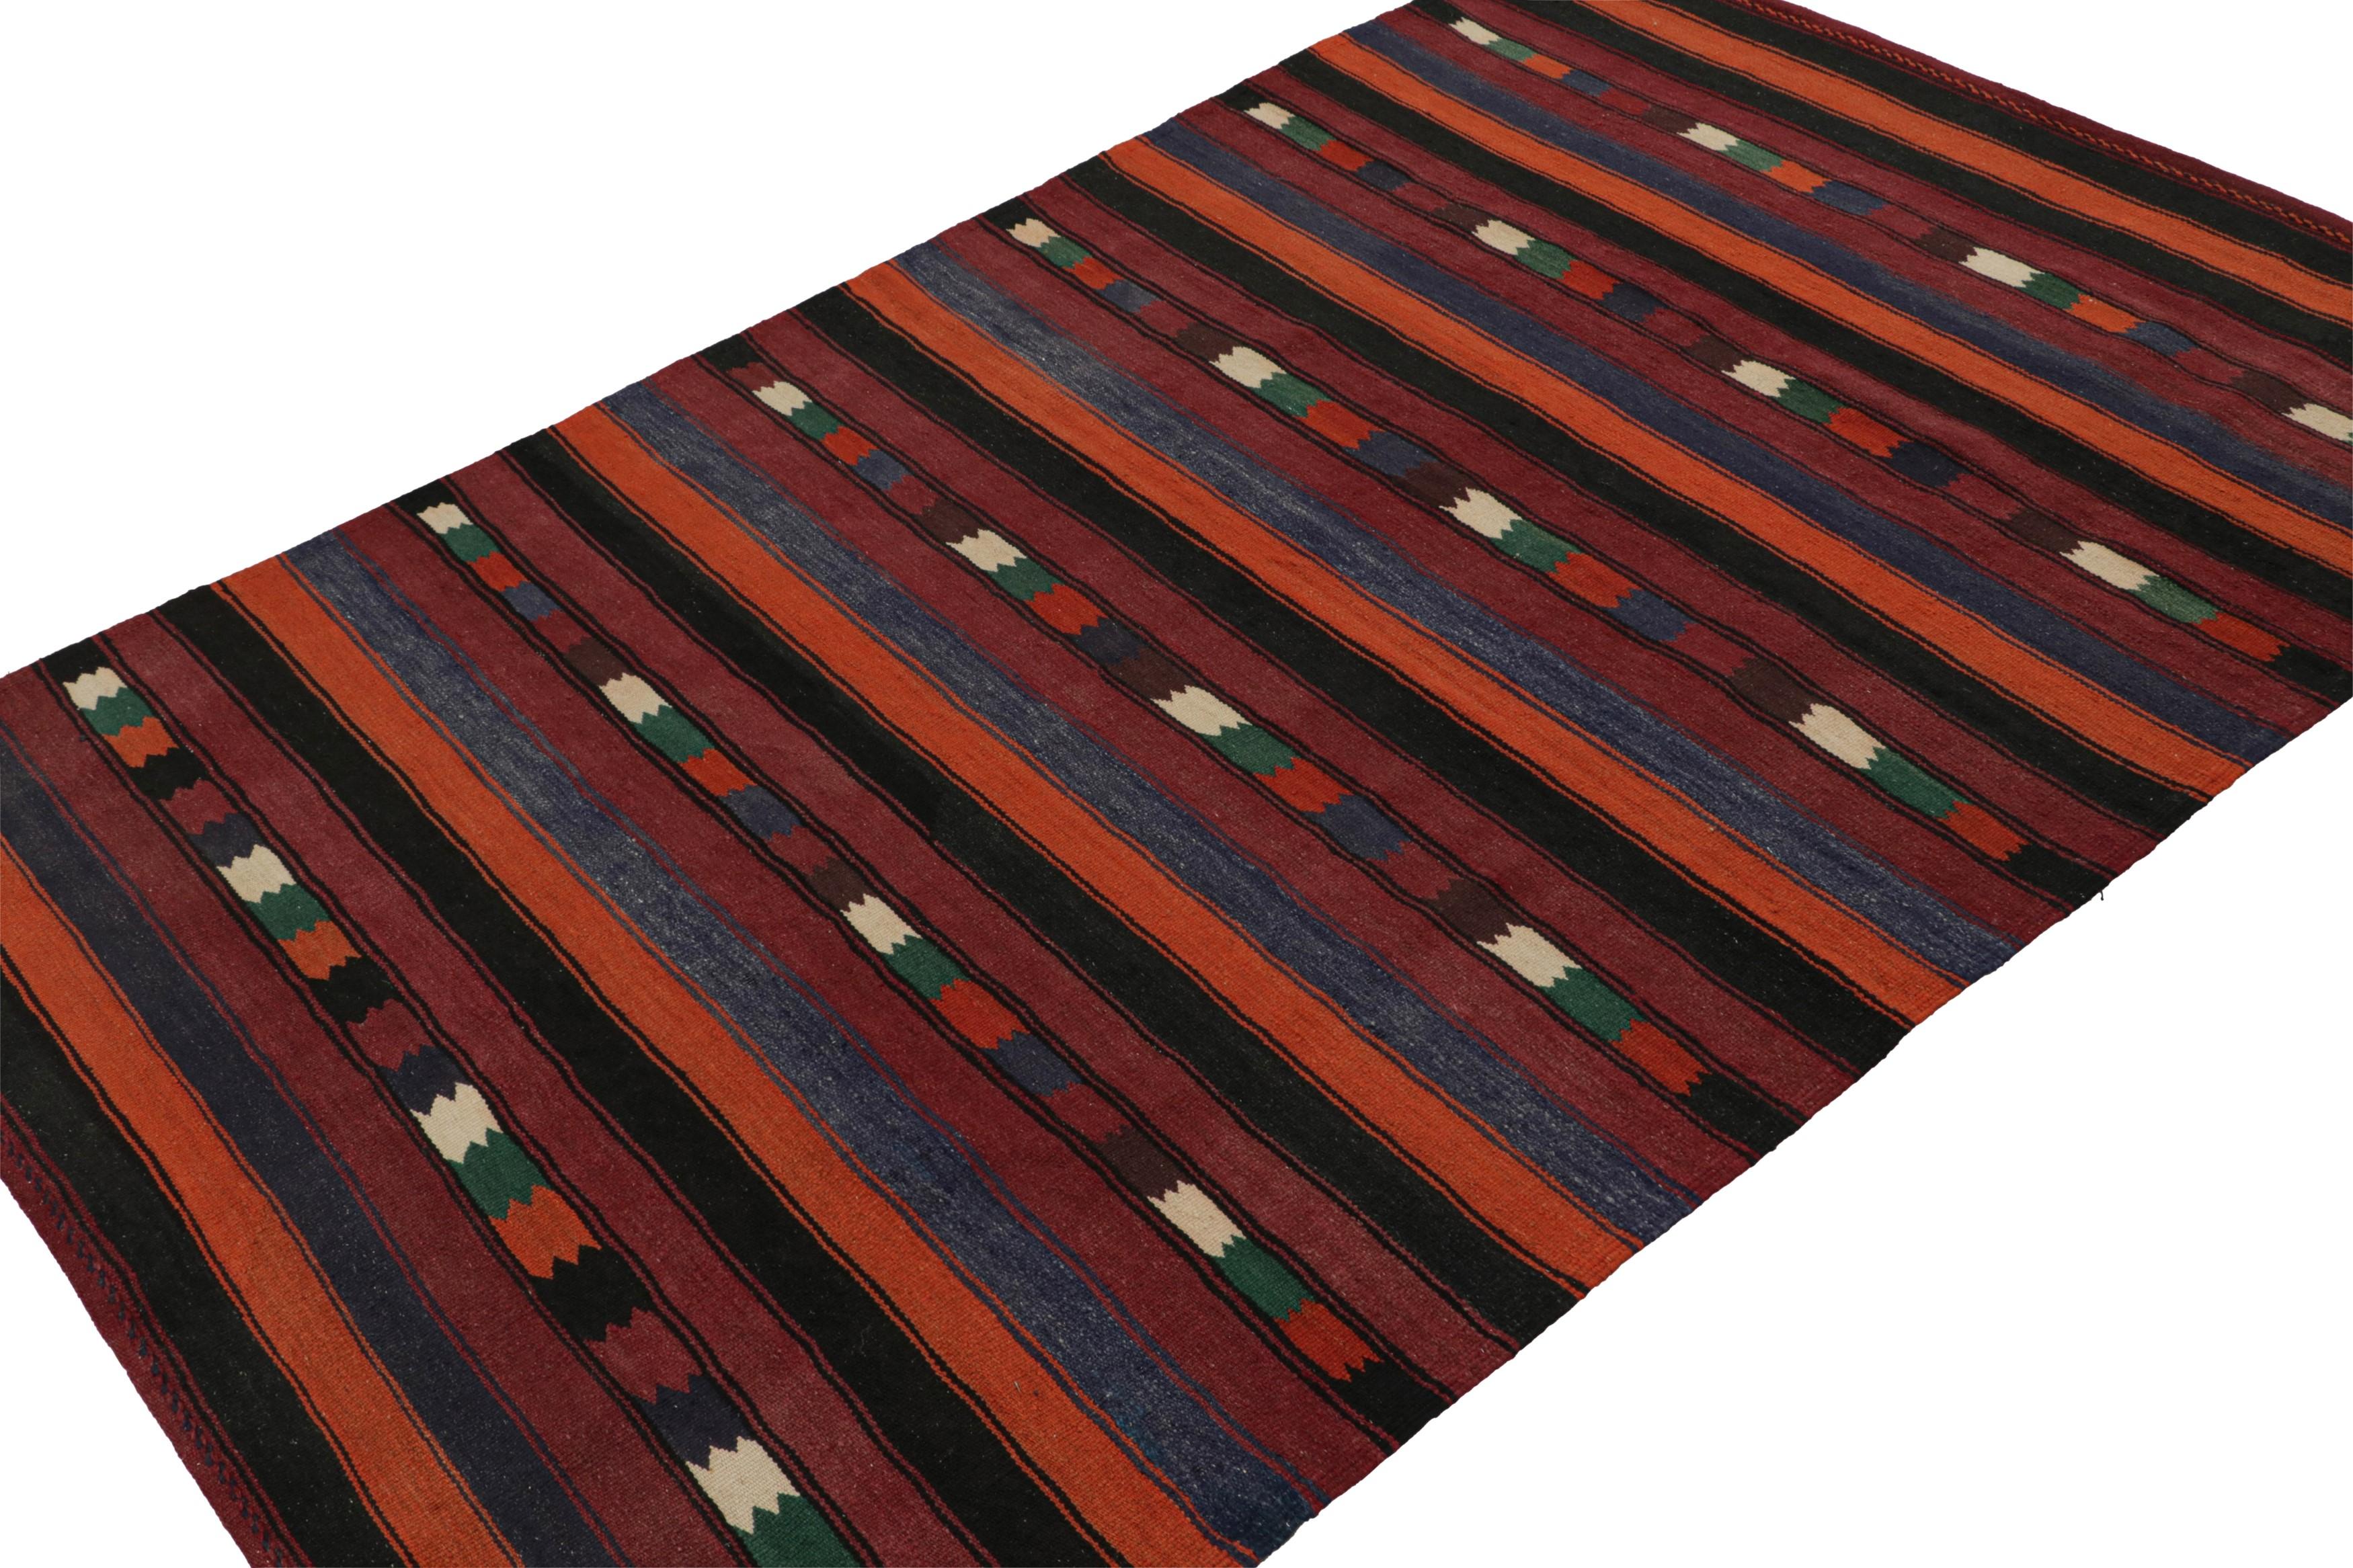 Handwoven in wool, circa 1950-1960, this 5x7 vintage Afghan tribal kilim rug seems to draw on Karabagh Kilims and similar Persian tribal provenances that favor such a play of rich and playful tones. 

On the Design: 

Drawing on Karabagh Kilims and